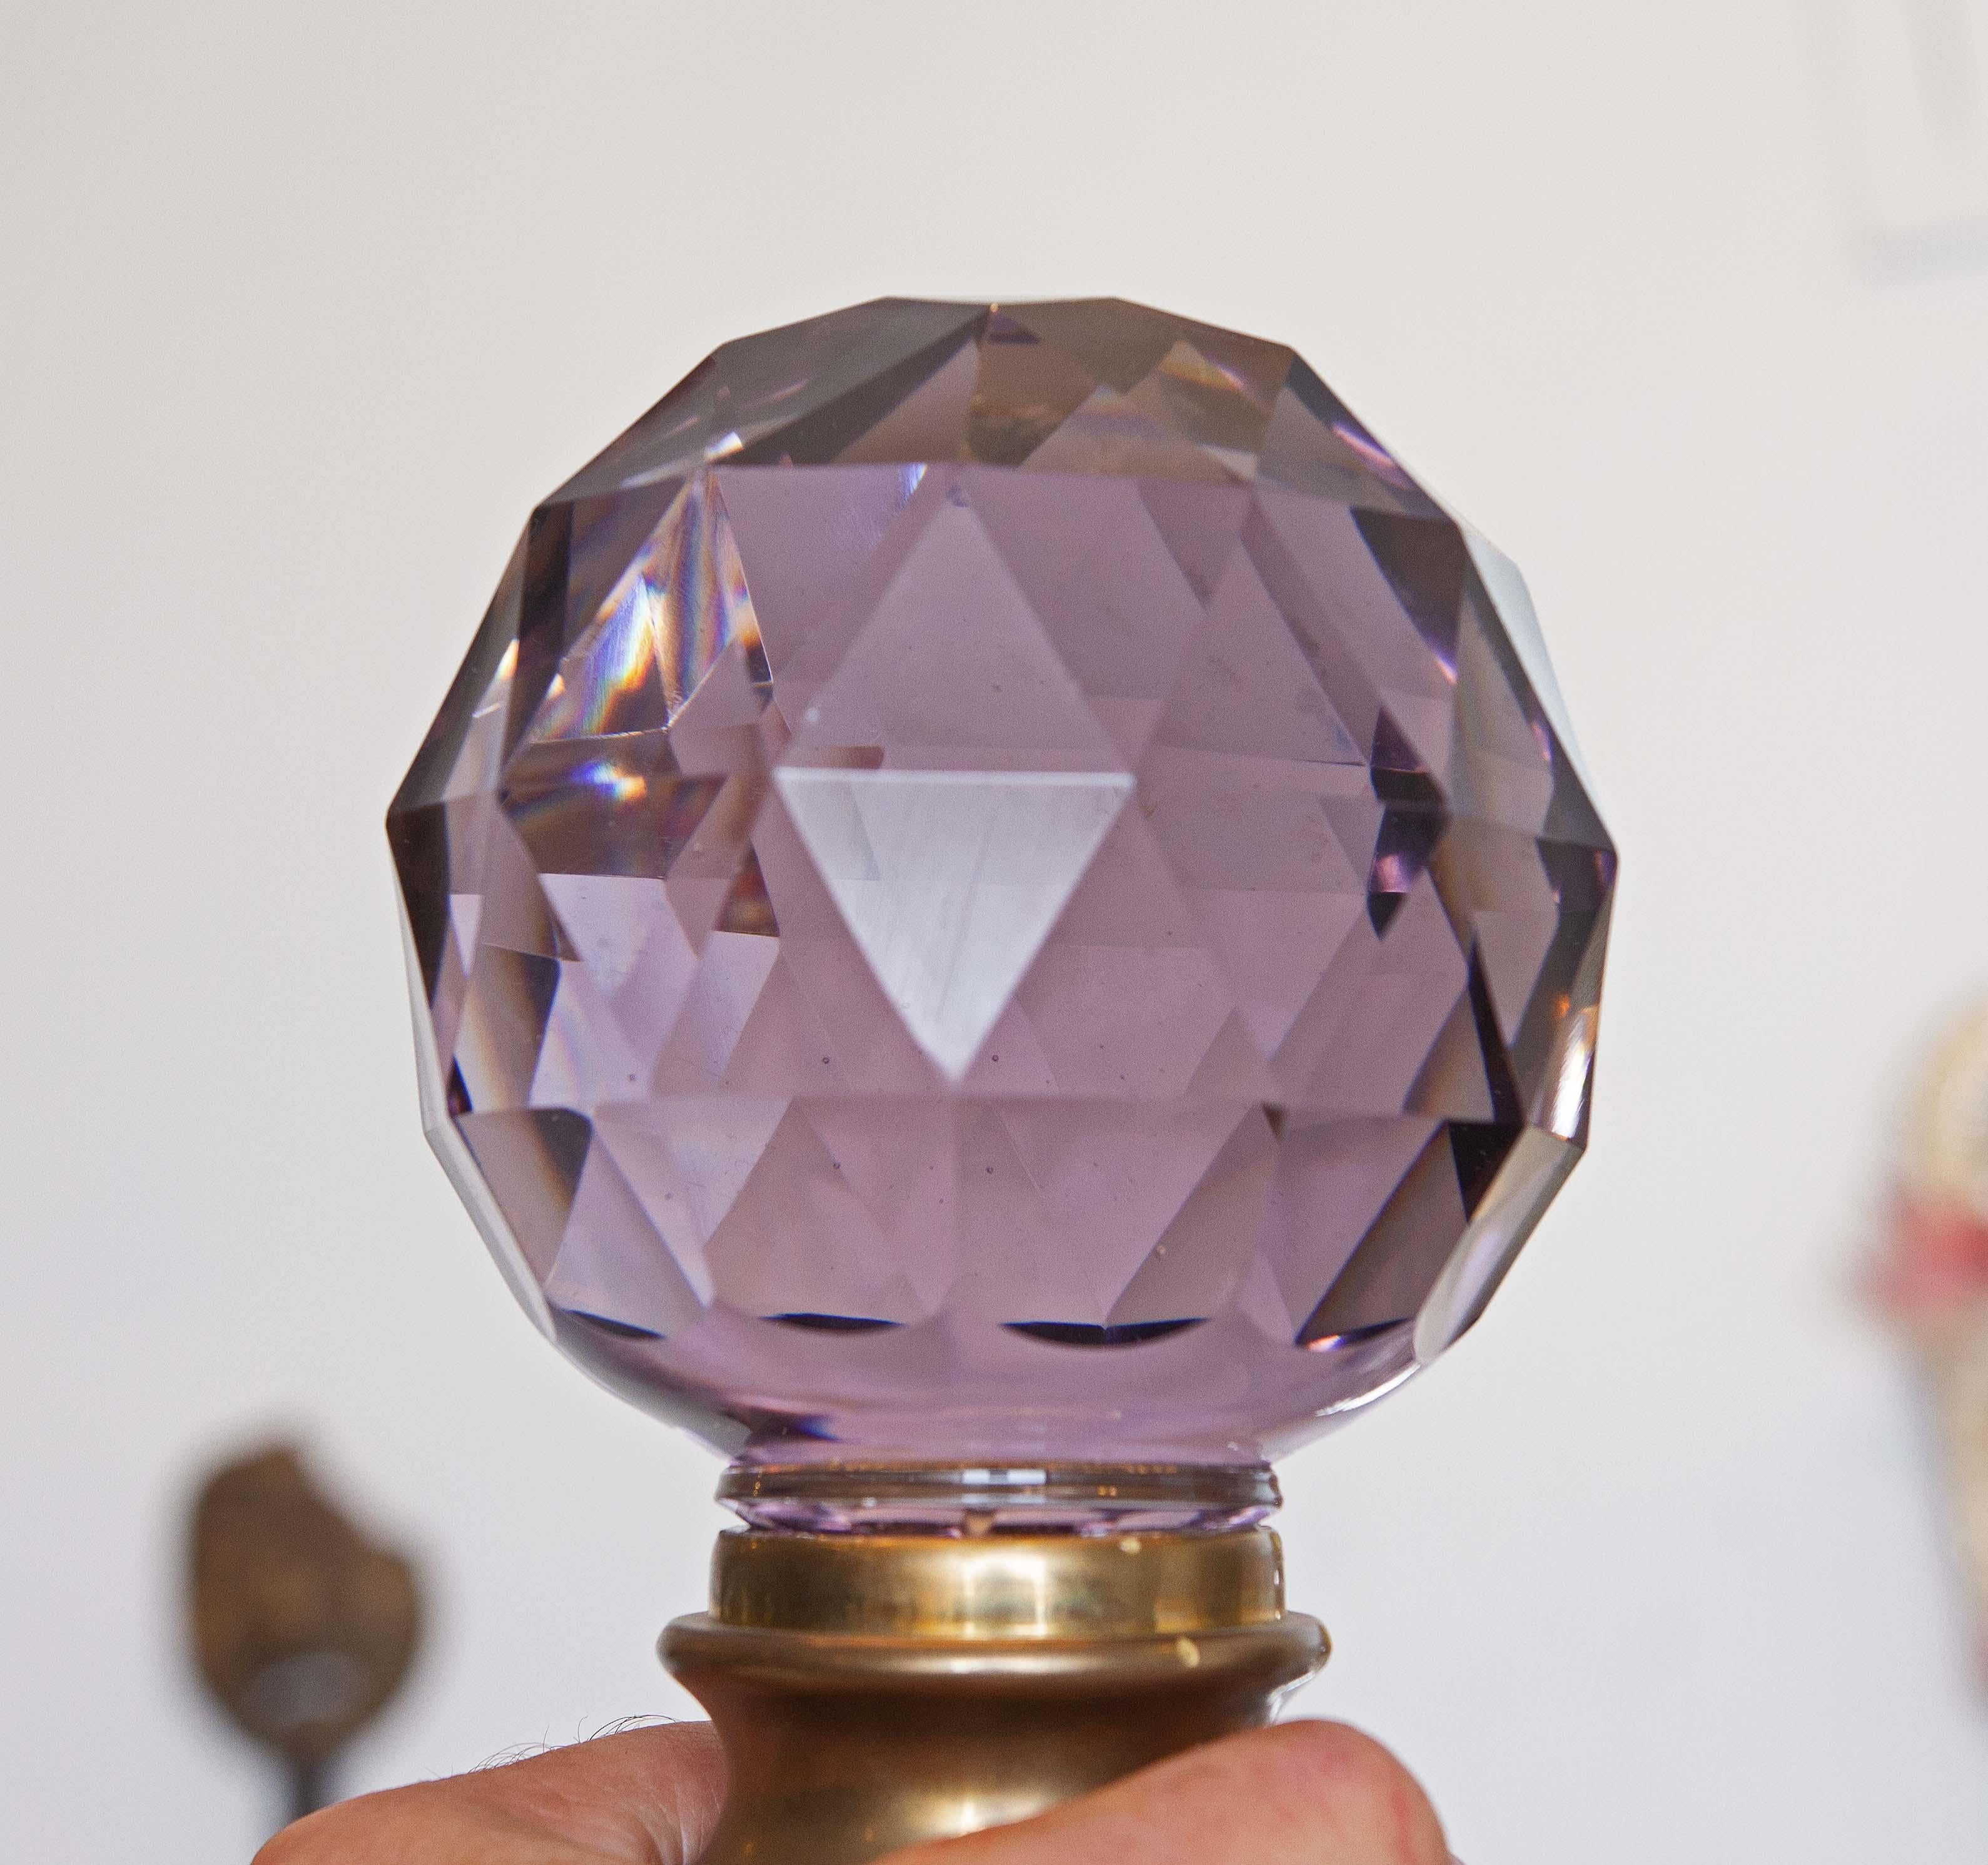 French faceted aubergine crystal newel post finial. Very unusual color. Early 20th century. From an estate collection.